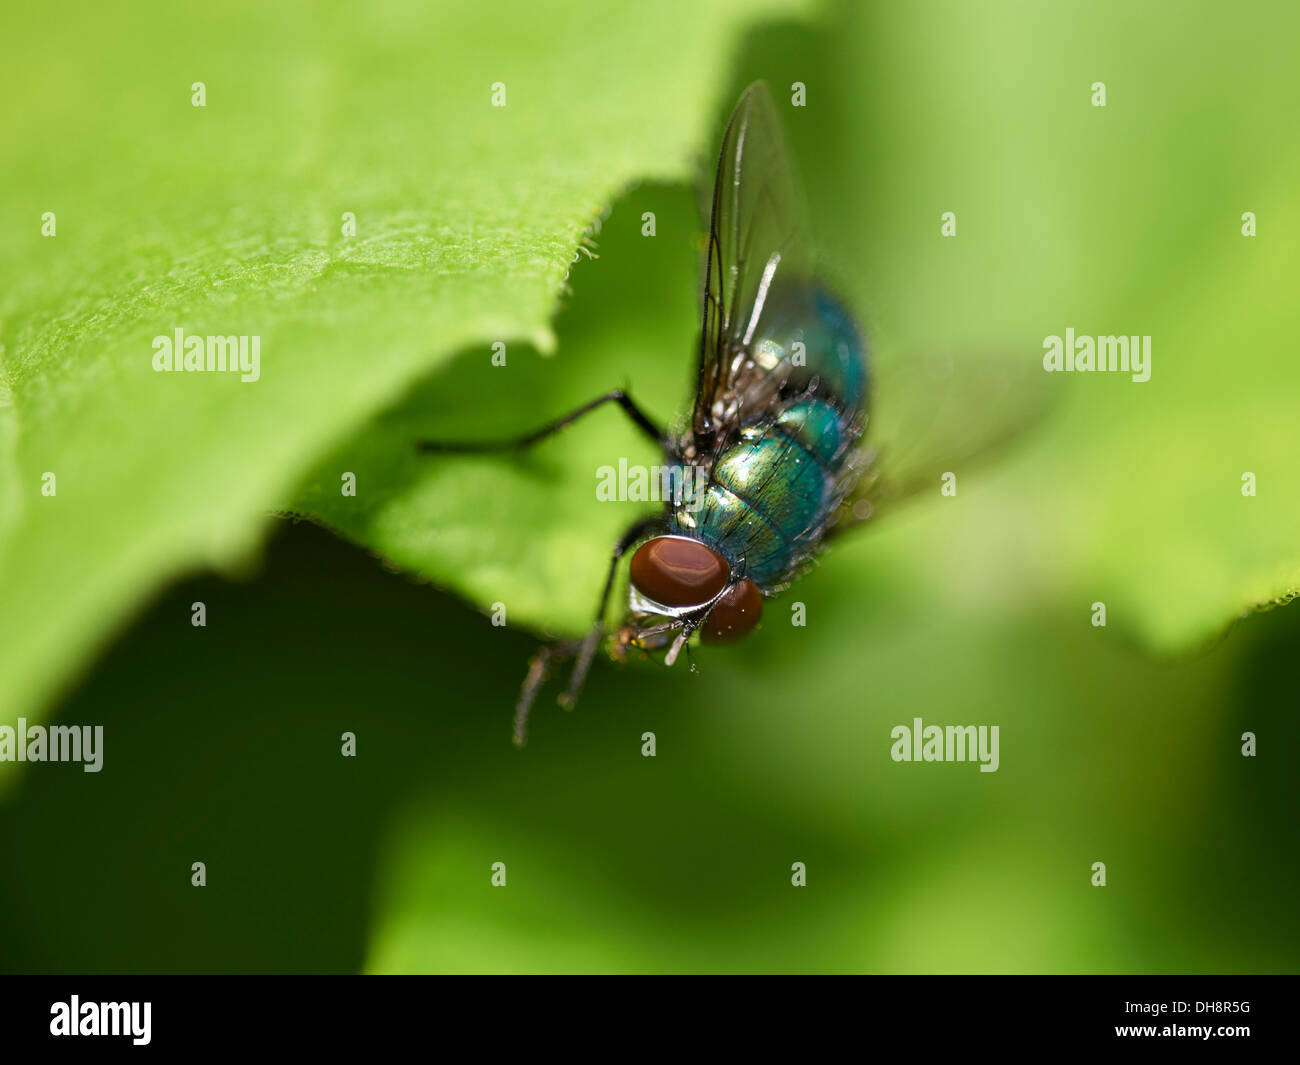 Green bottle fly perched on leaf. Stock Photo